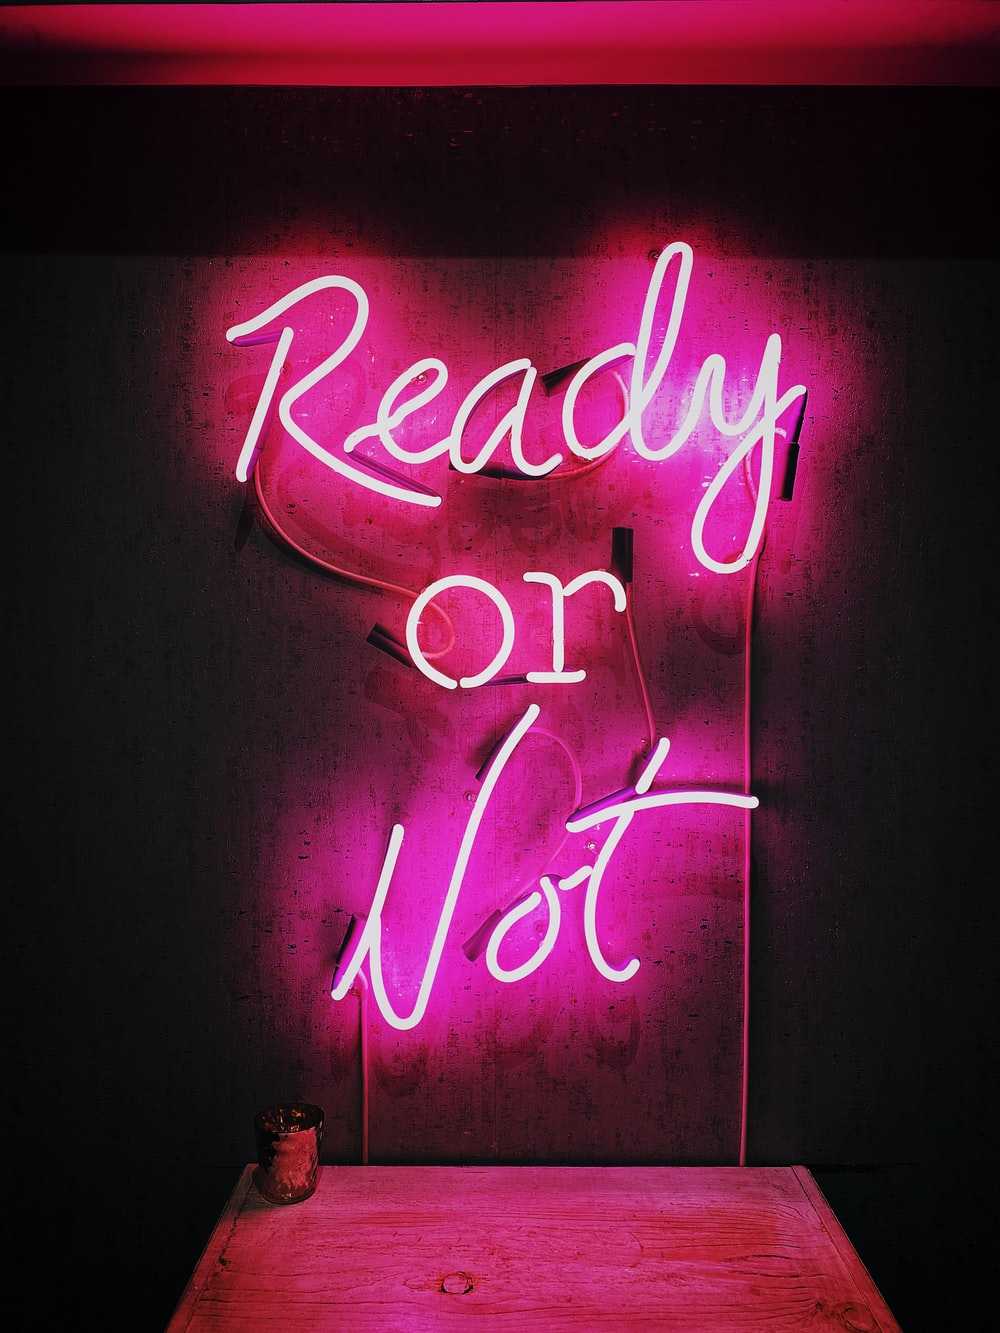 Hot Pink Aesthetic Wallpaper - NawPic